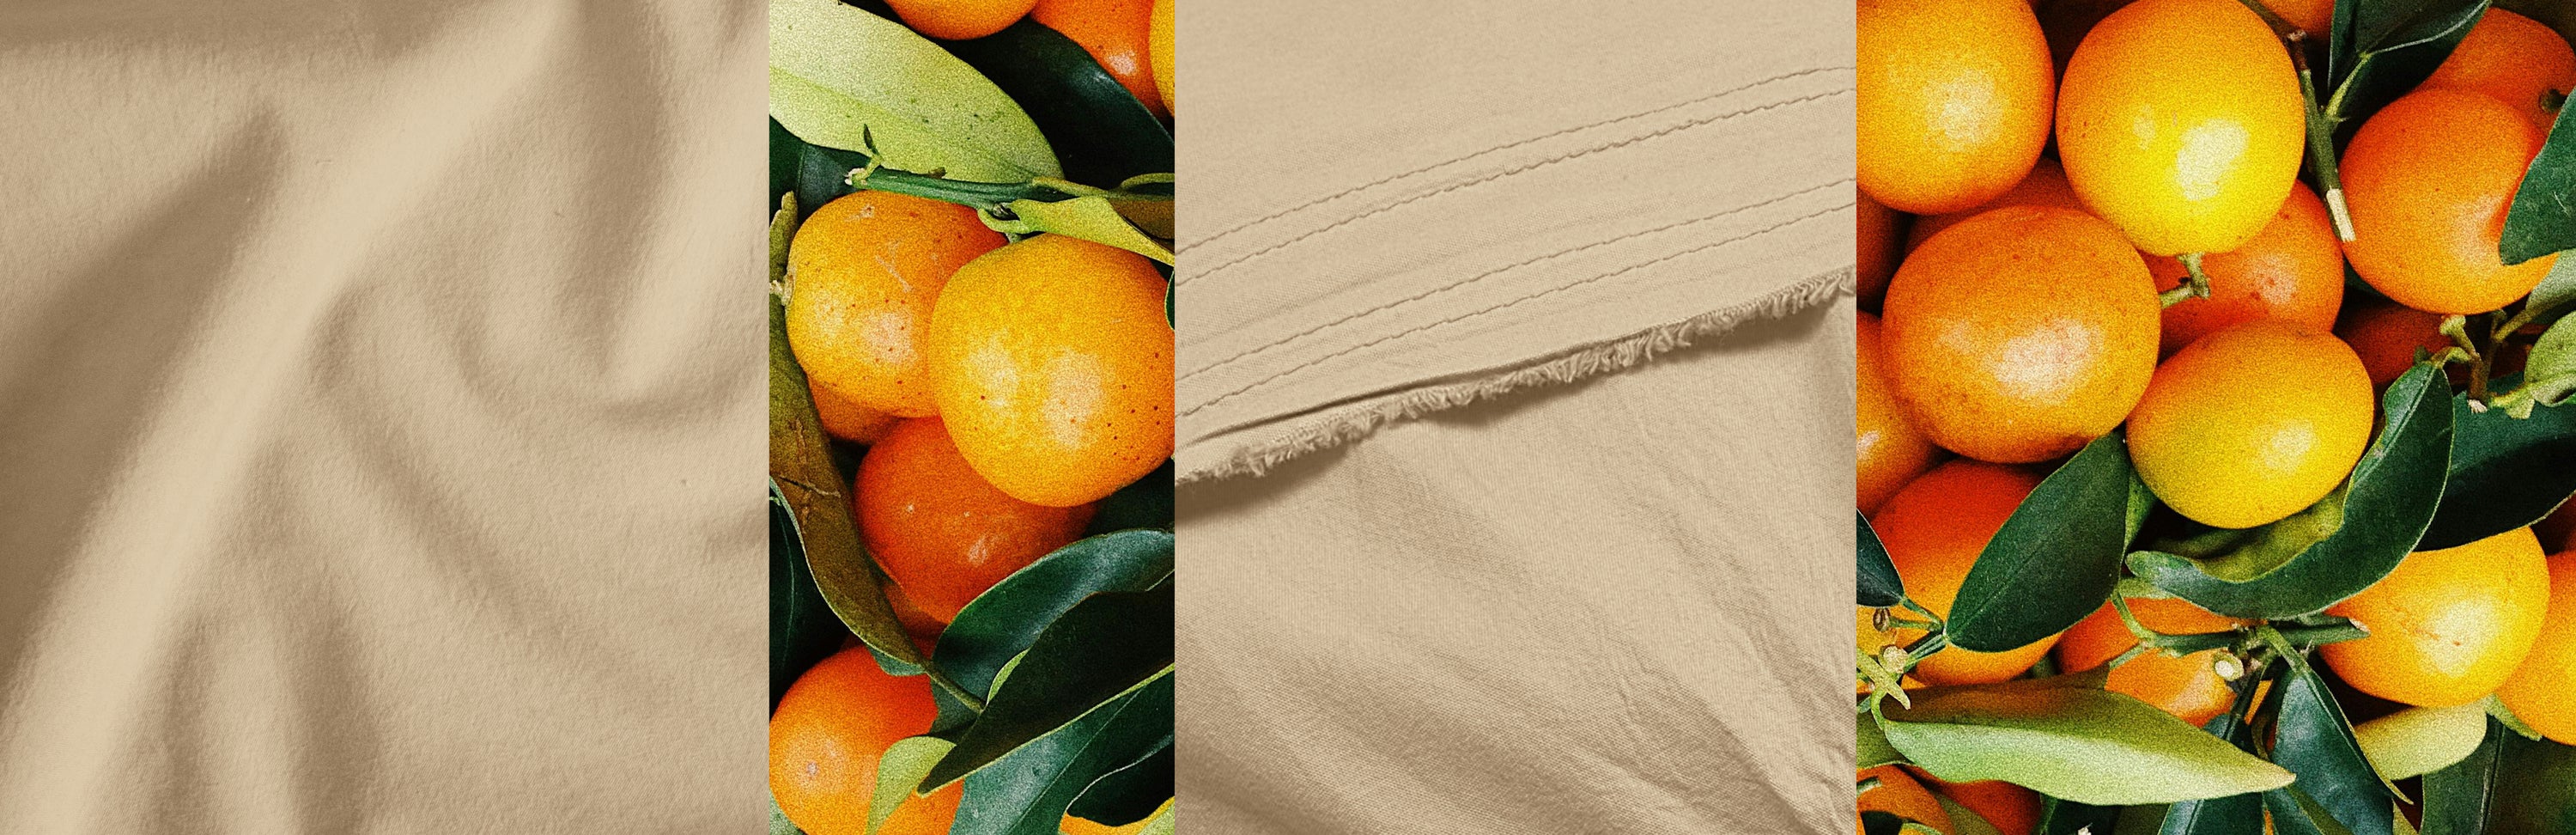 Images of oranges and Ochre fabric